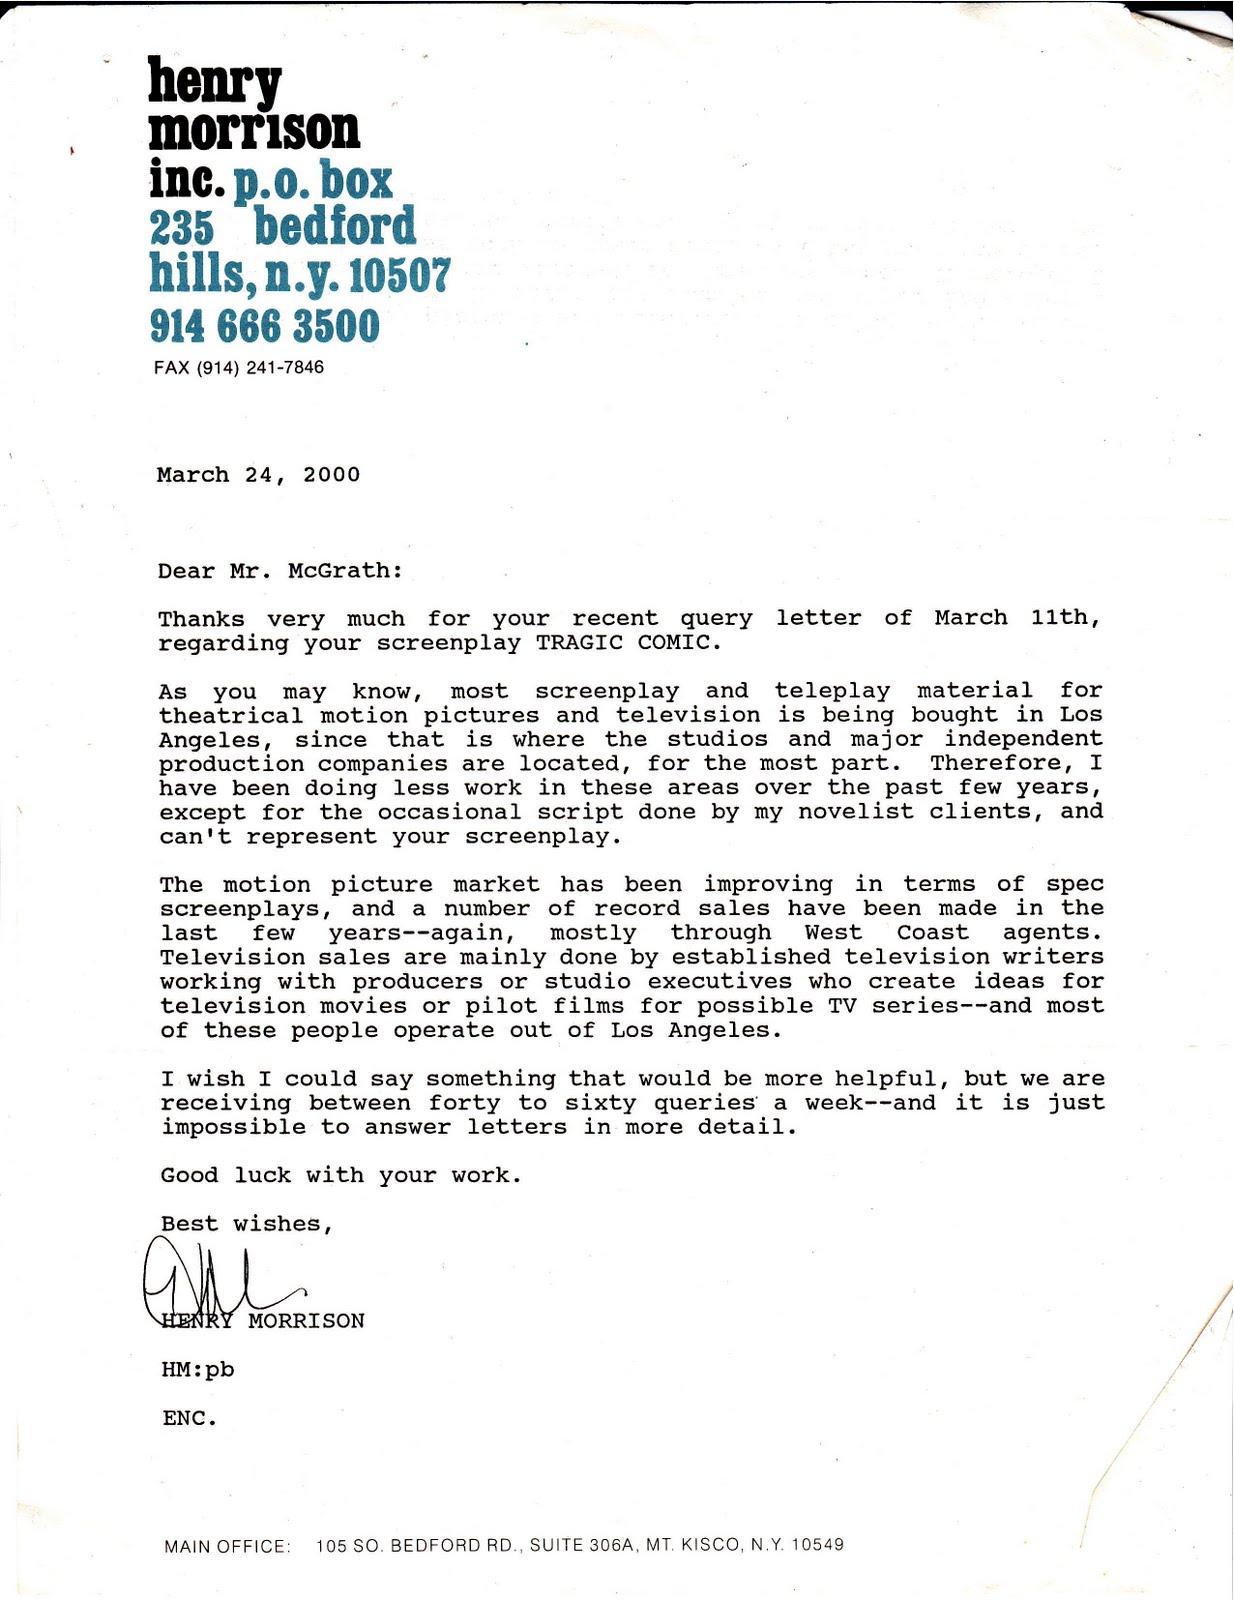 My Life Scanned: Rejection Letter from Henry Morrison ...